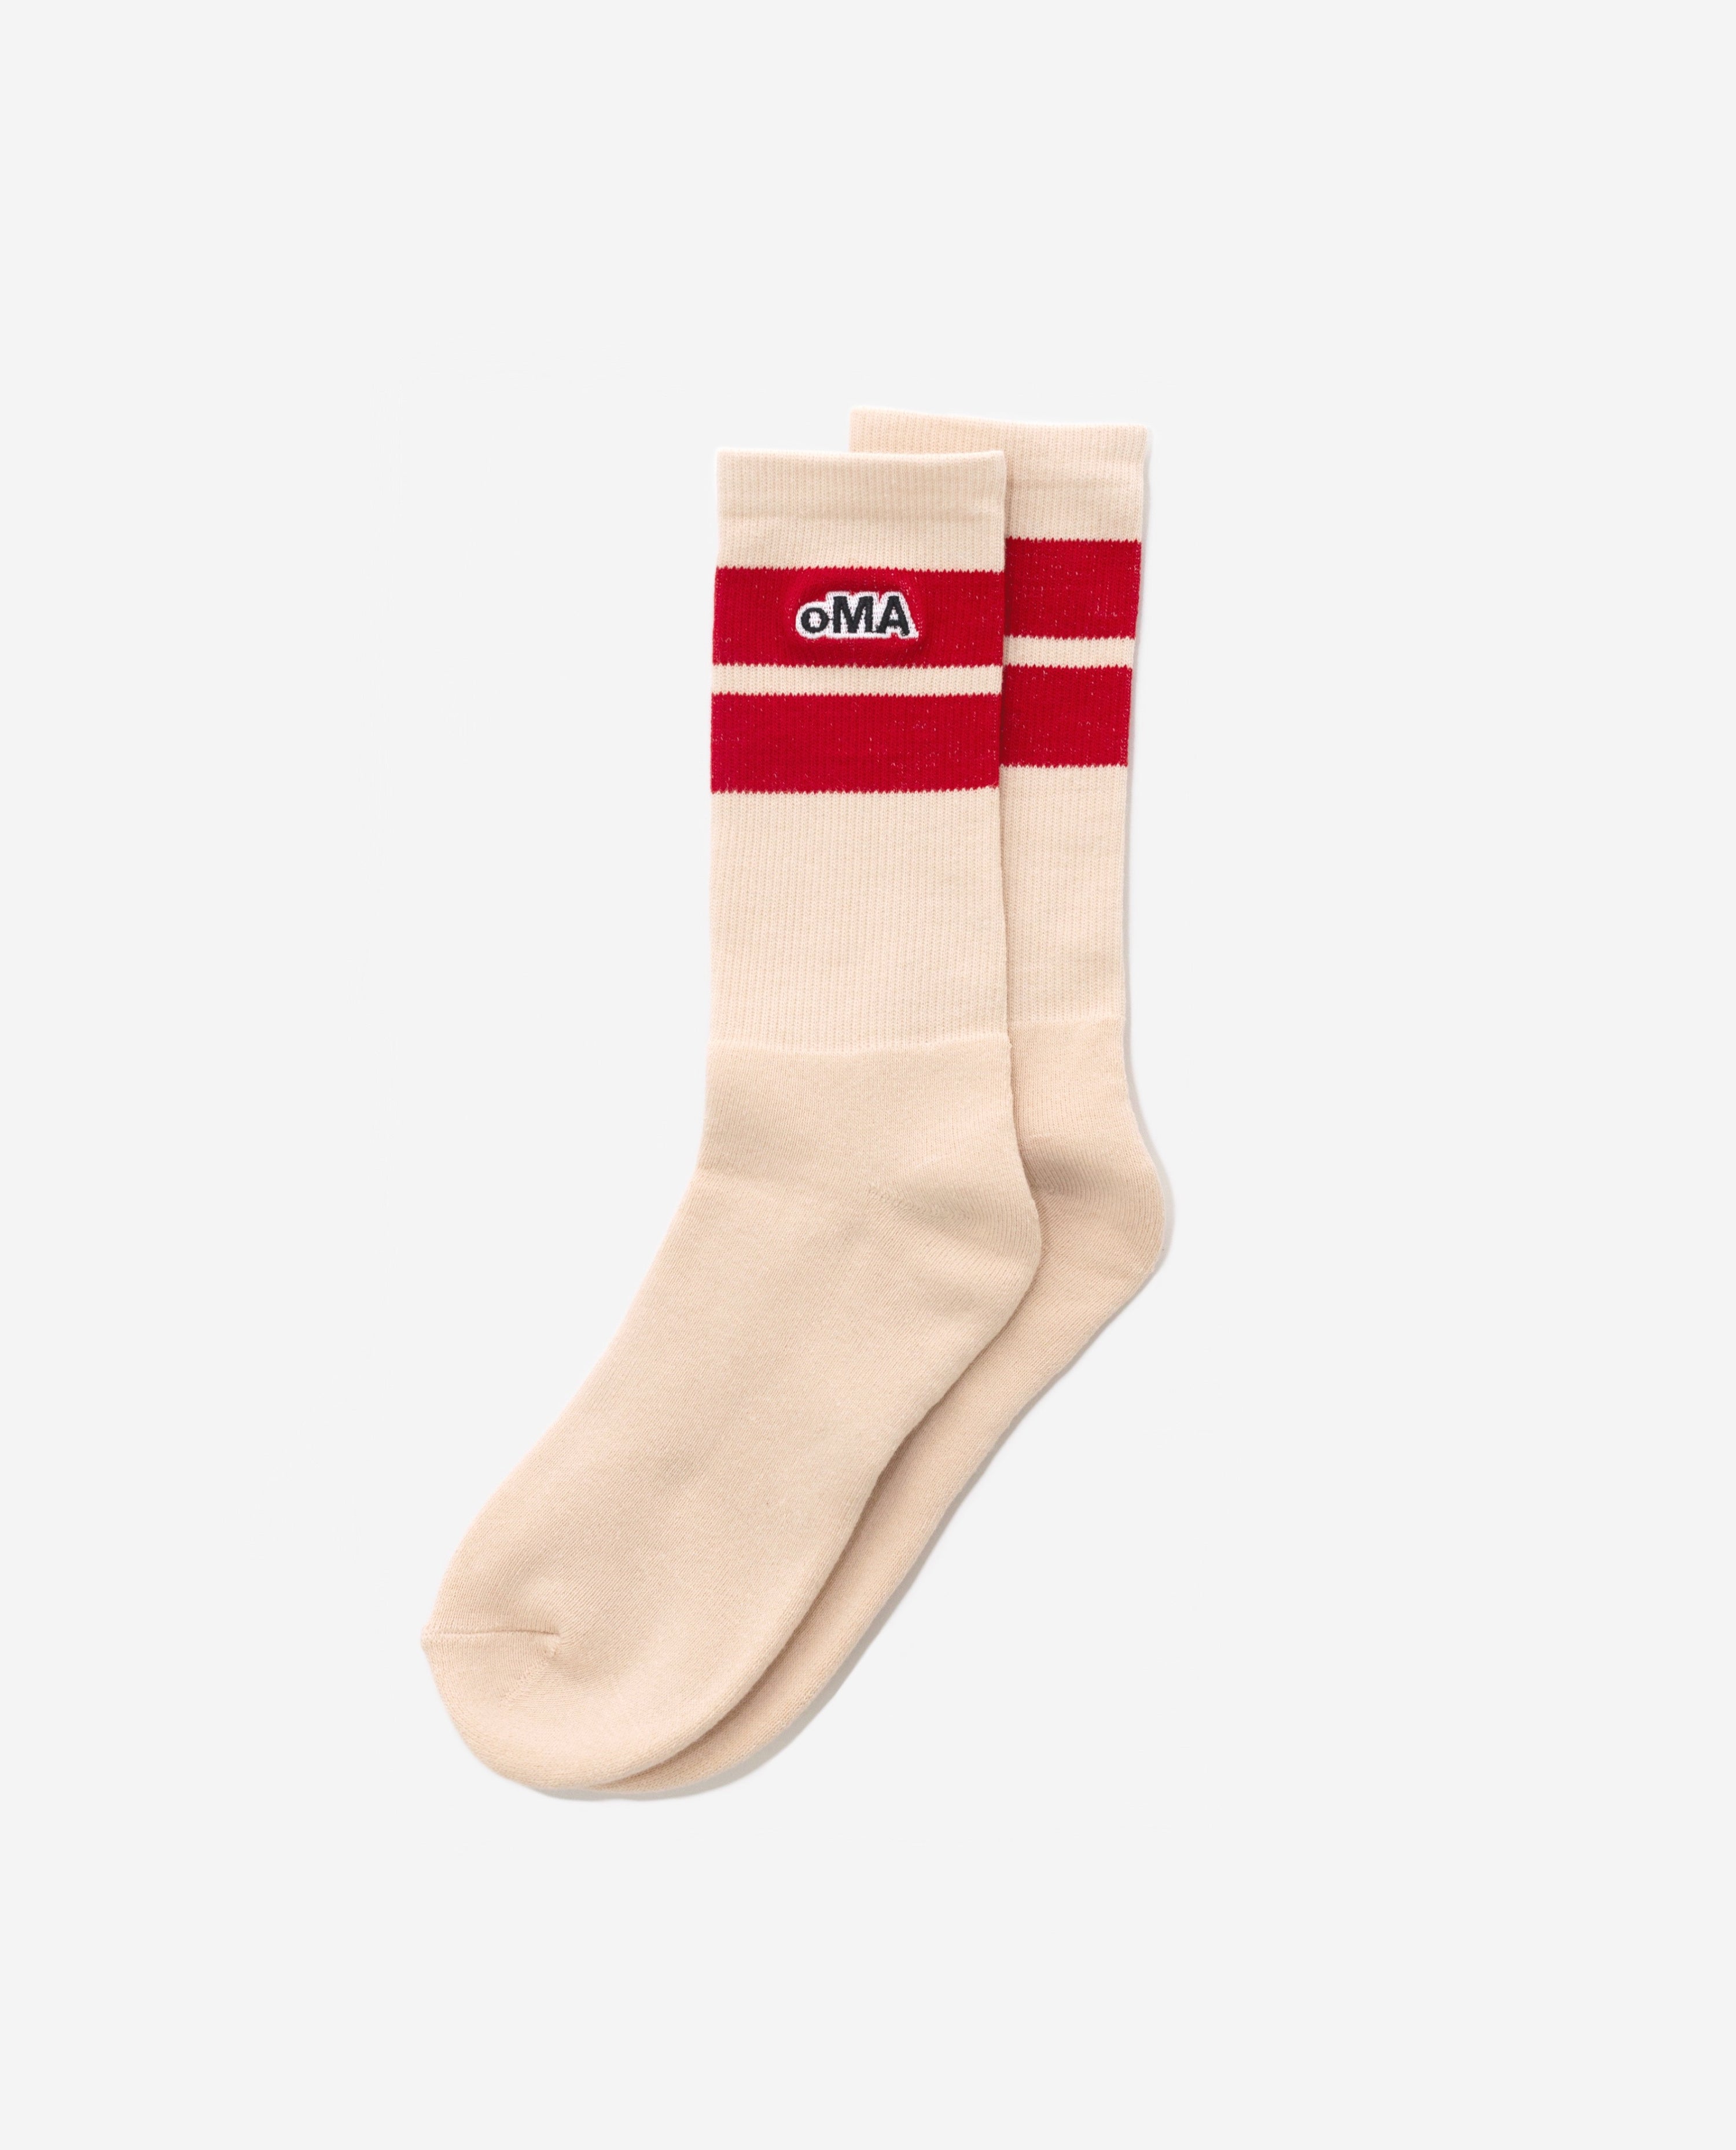 STRIPED EMBROIDERED LOGO SOCKS (CREAM/RED)